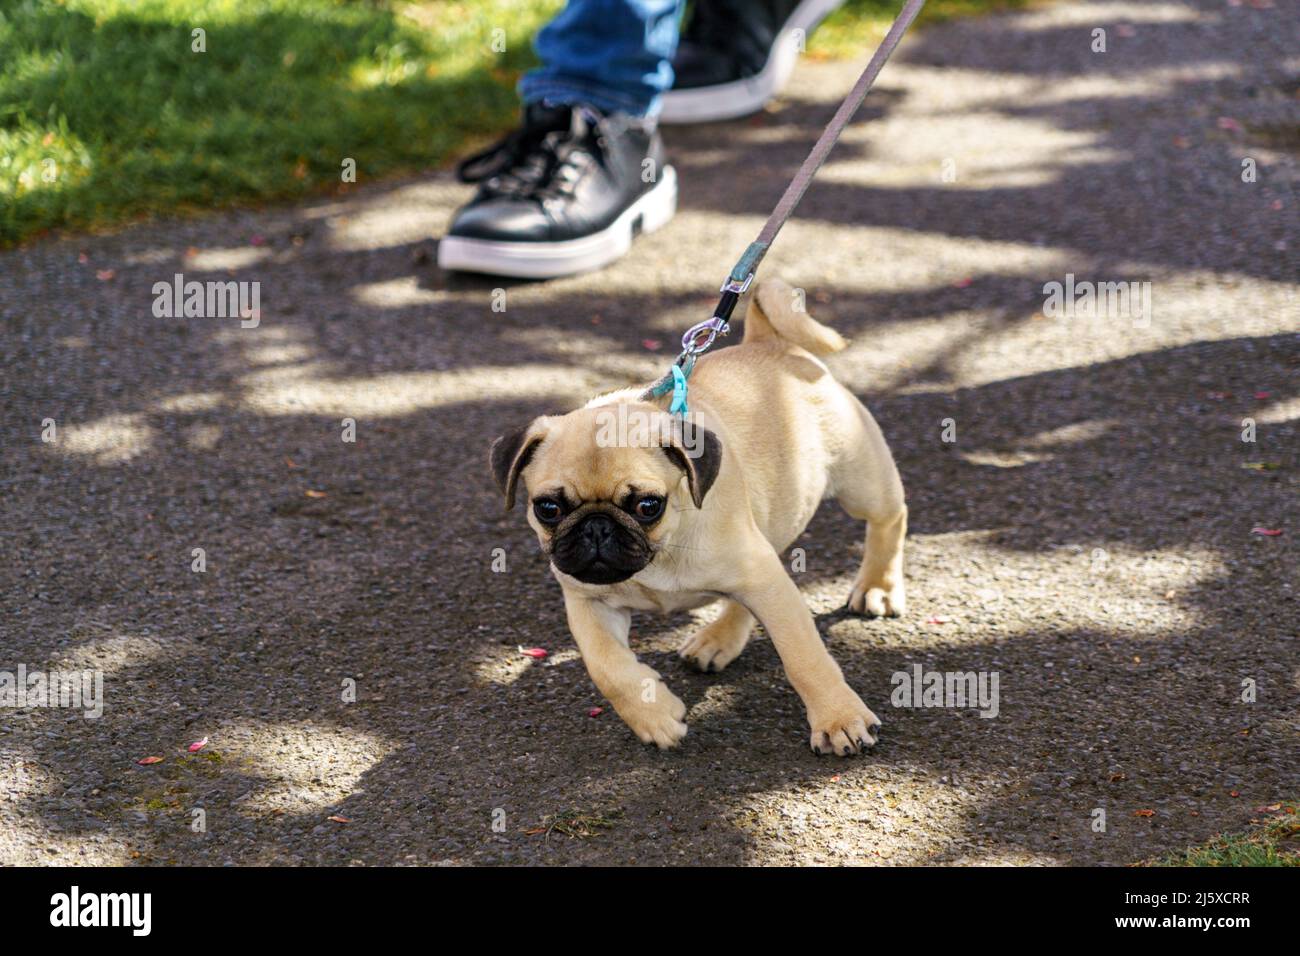 Cute fawn-coloured Pug also called Dutch Bulldogs, with wrinkly, short-muzzled face a curly tail on a leash enjoying a walk in the park. Stock Photo